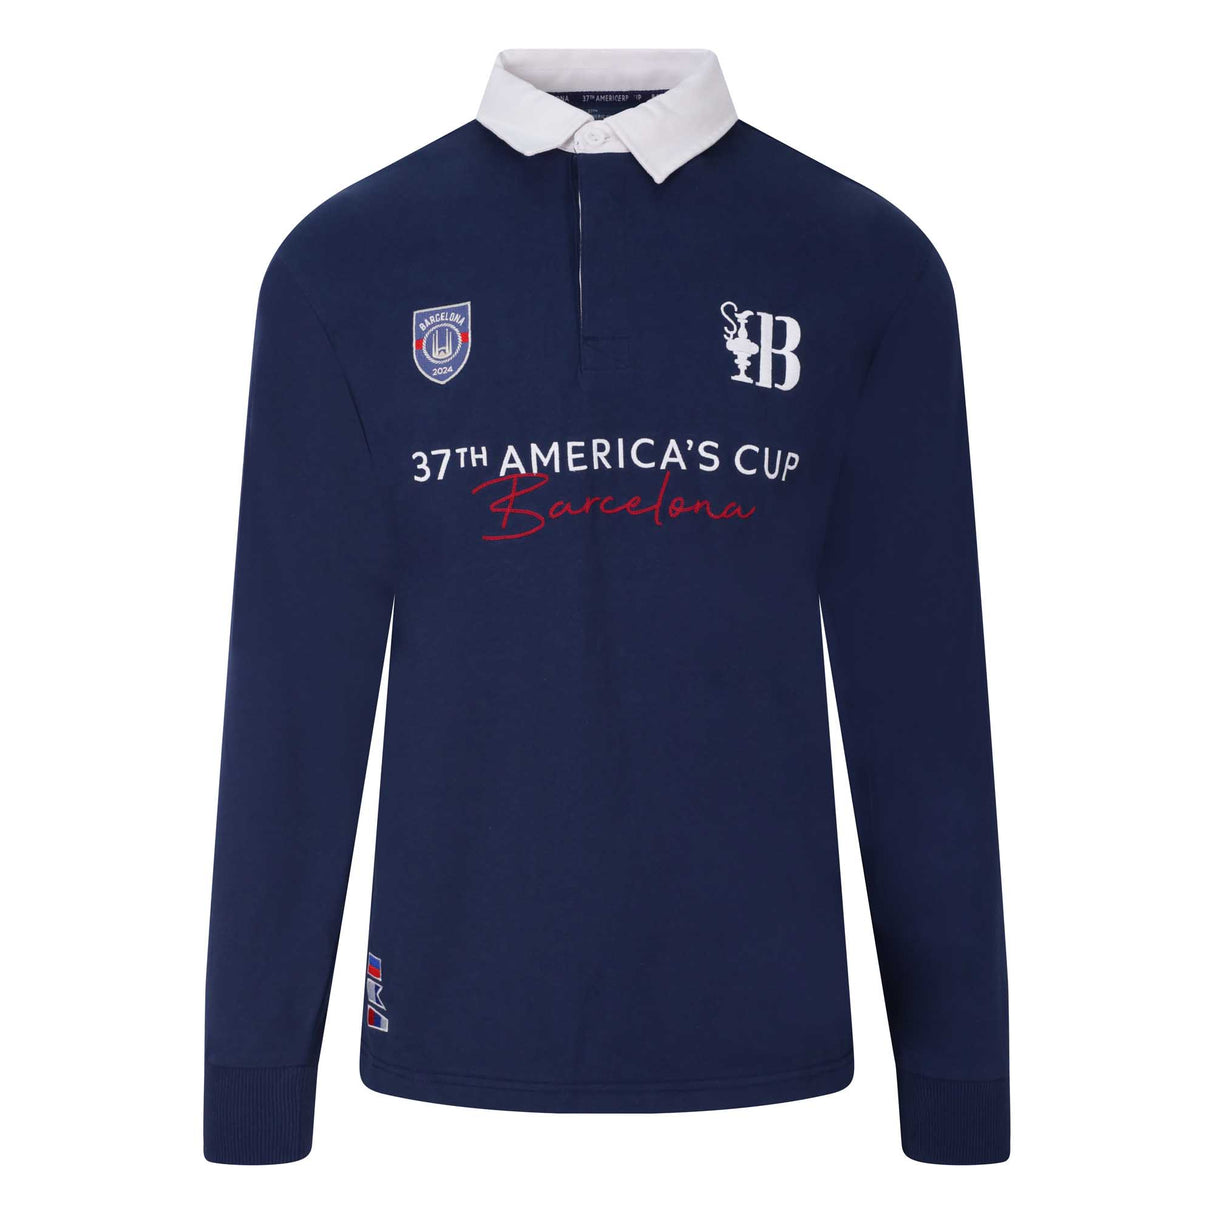 37th America's Cup AC League Sailing Jersey 37th Americas Cup Store